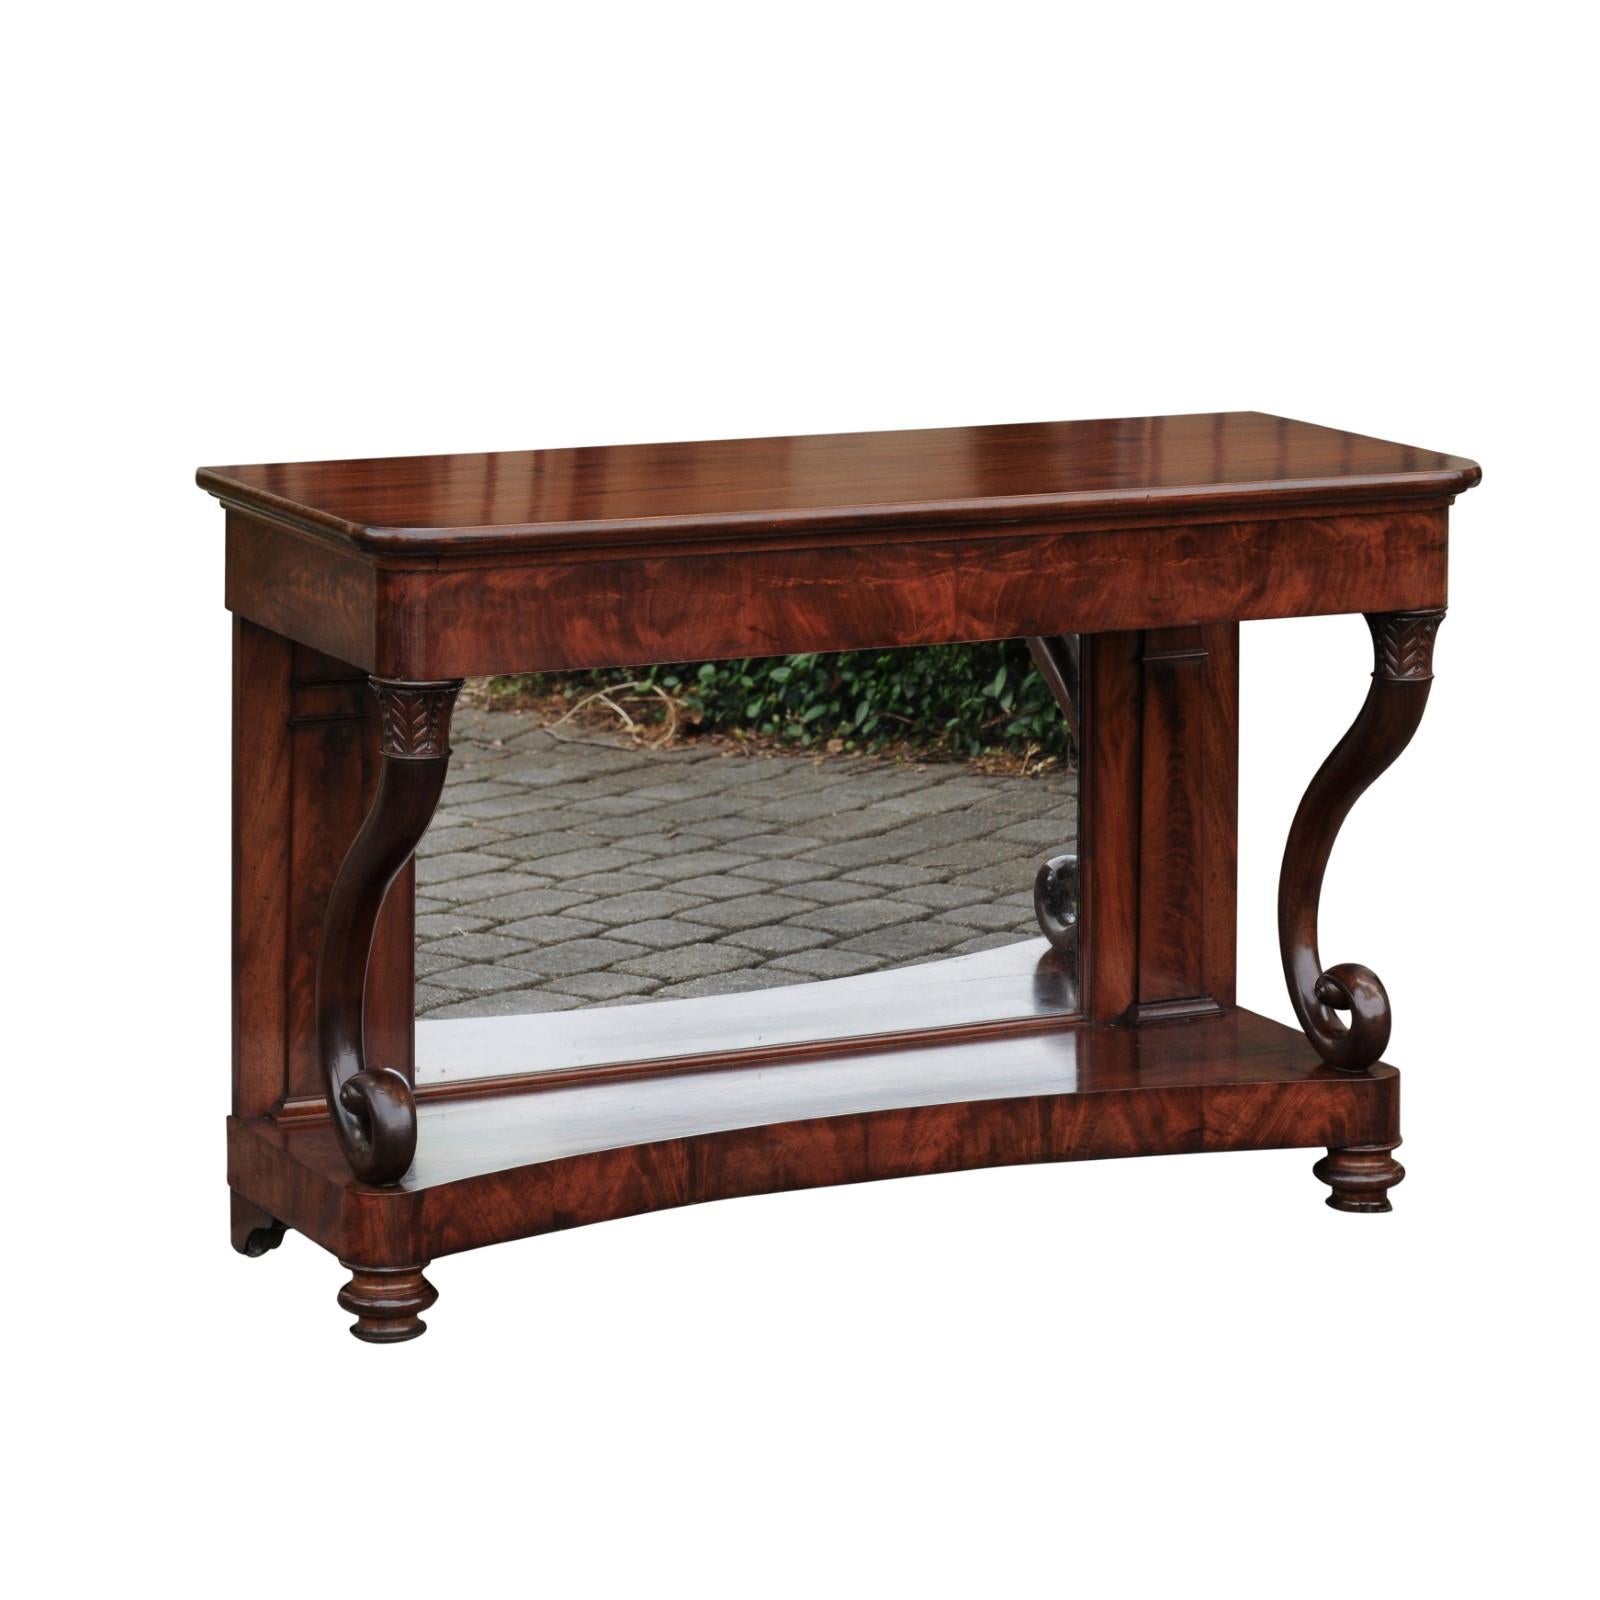 French Charles X Period 1830s Mahogany Console Table with Cornucopia Legs For Sale 9